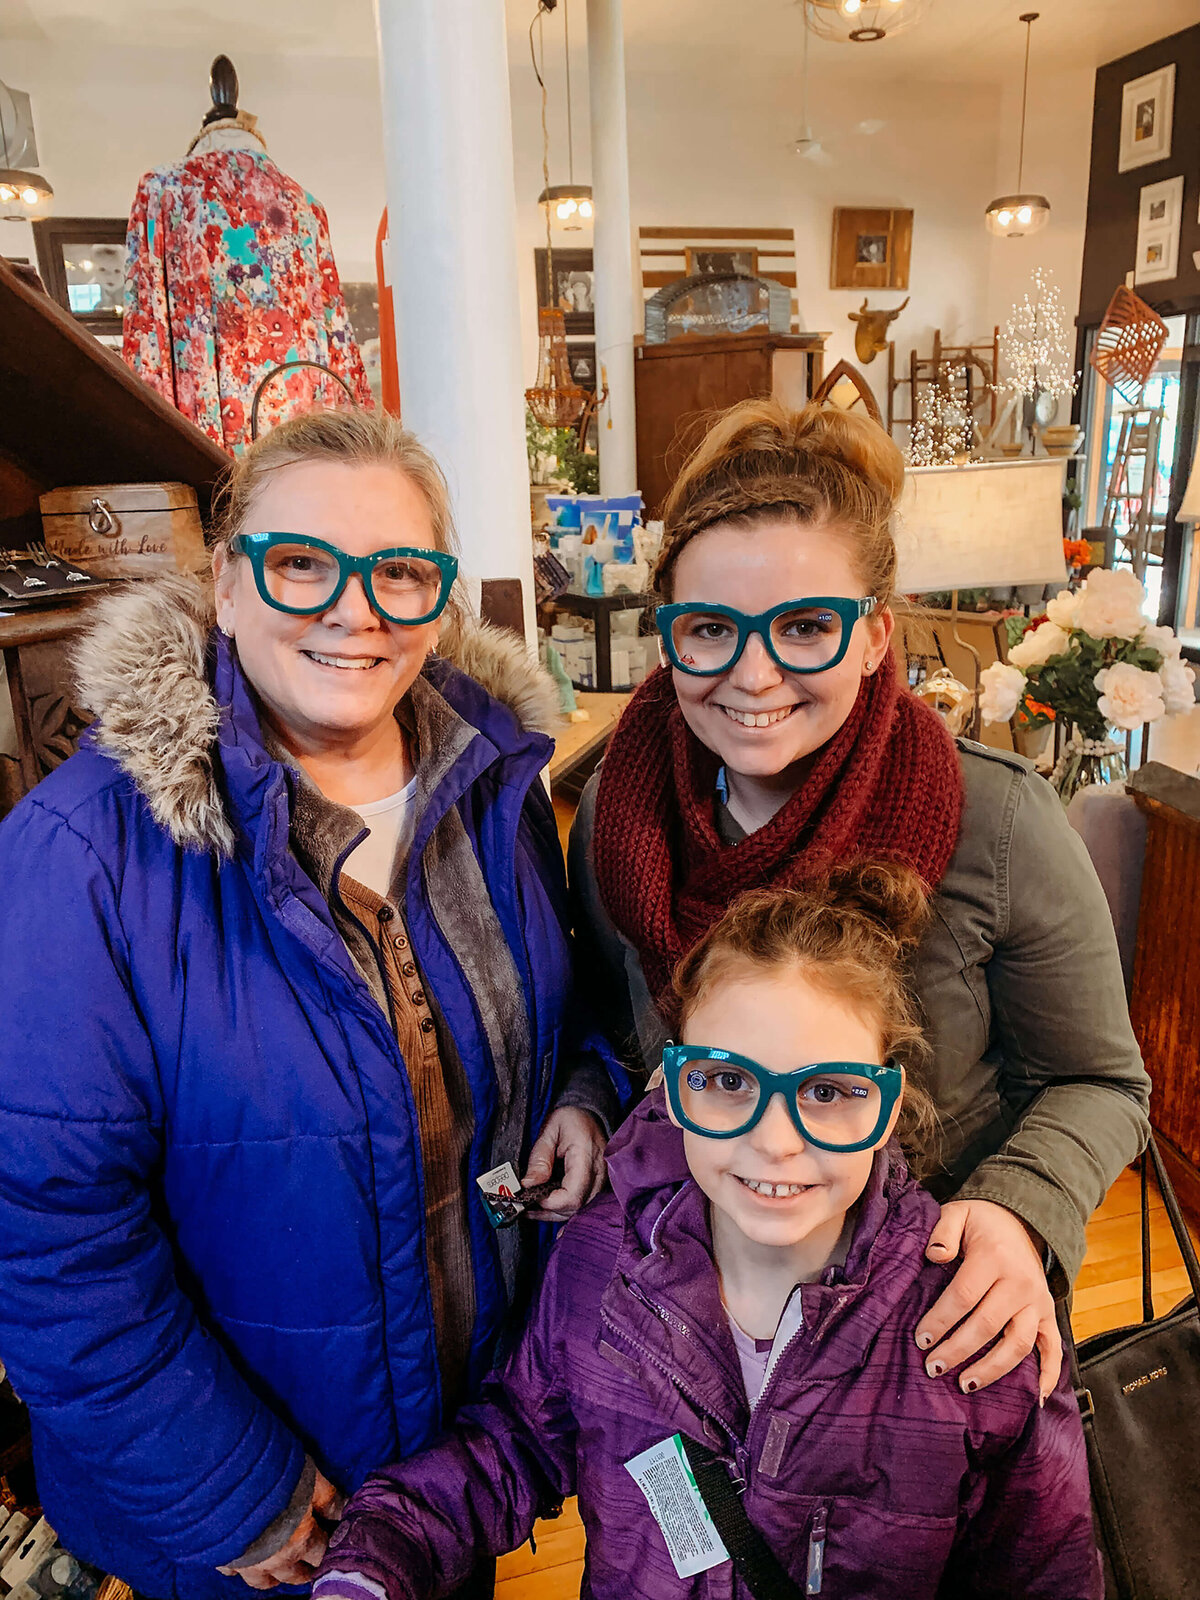 3 generations of women standing together with glasses